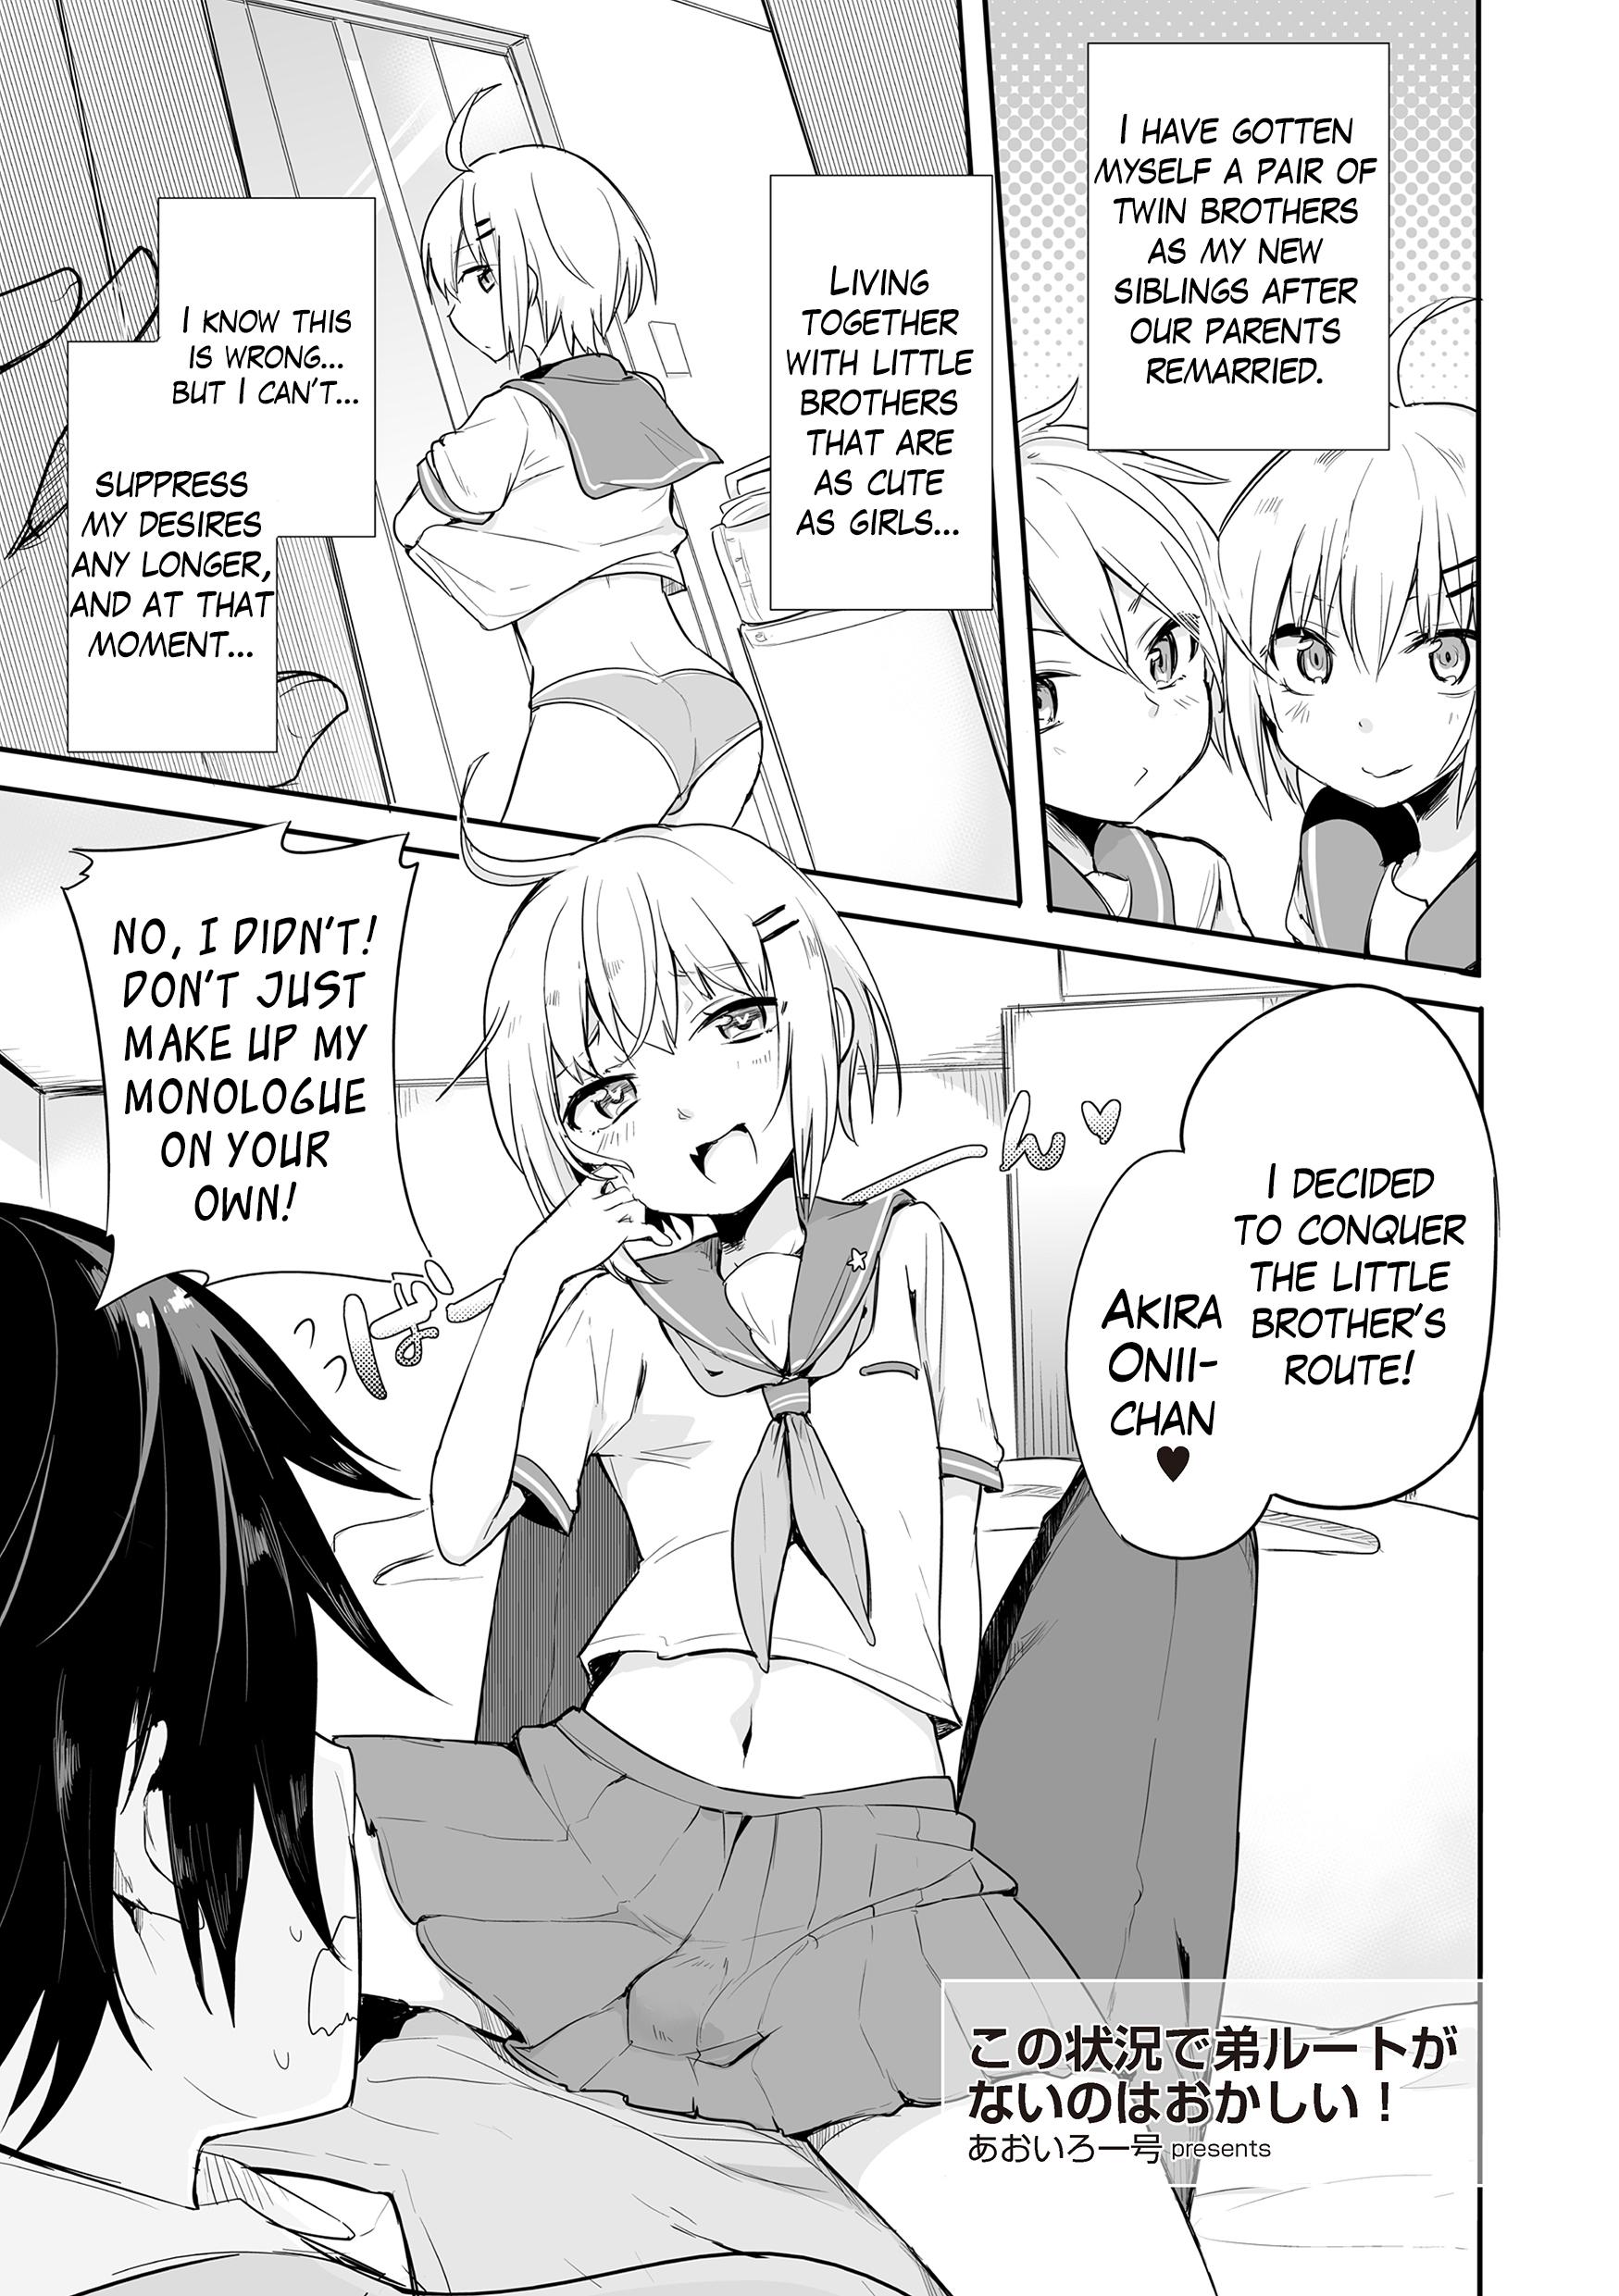 Firsttime Kono Joukyou de Otouto Route ga nai no wa Okashii! | This Situation is too Weird for it not to be a Little Brother’s Route! Gay 3some - Page 2